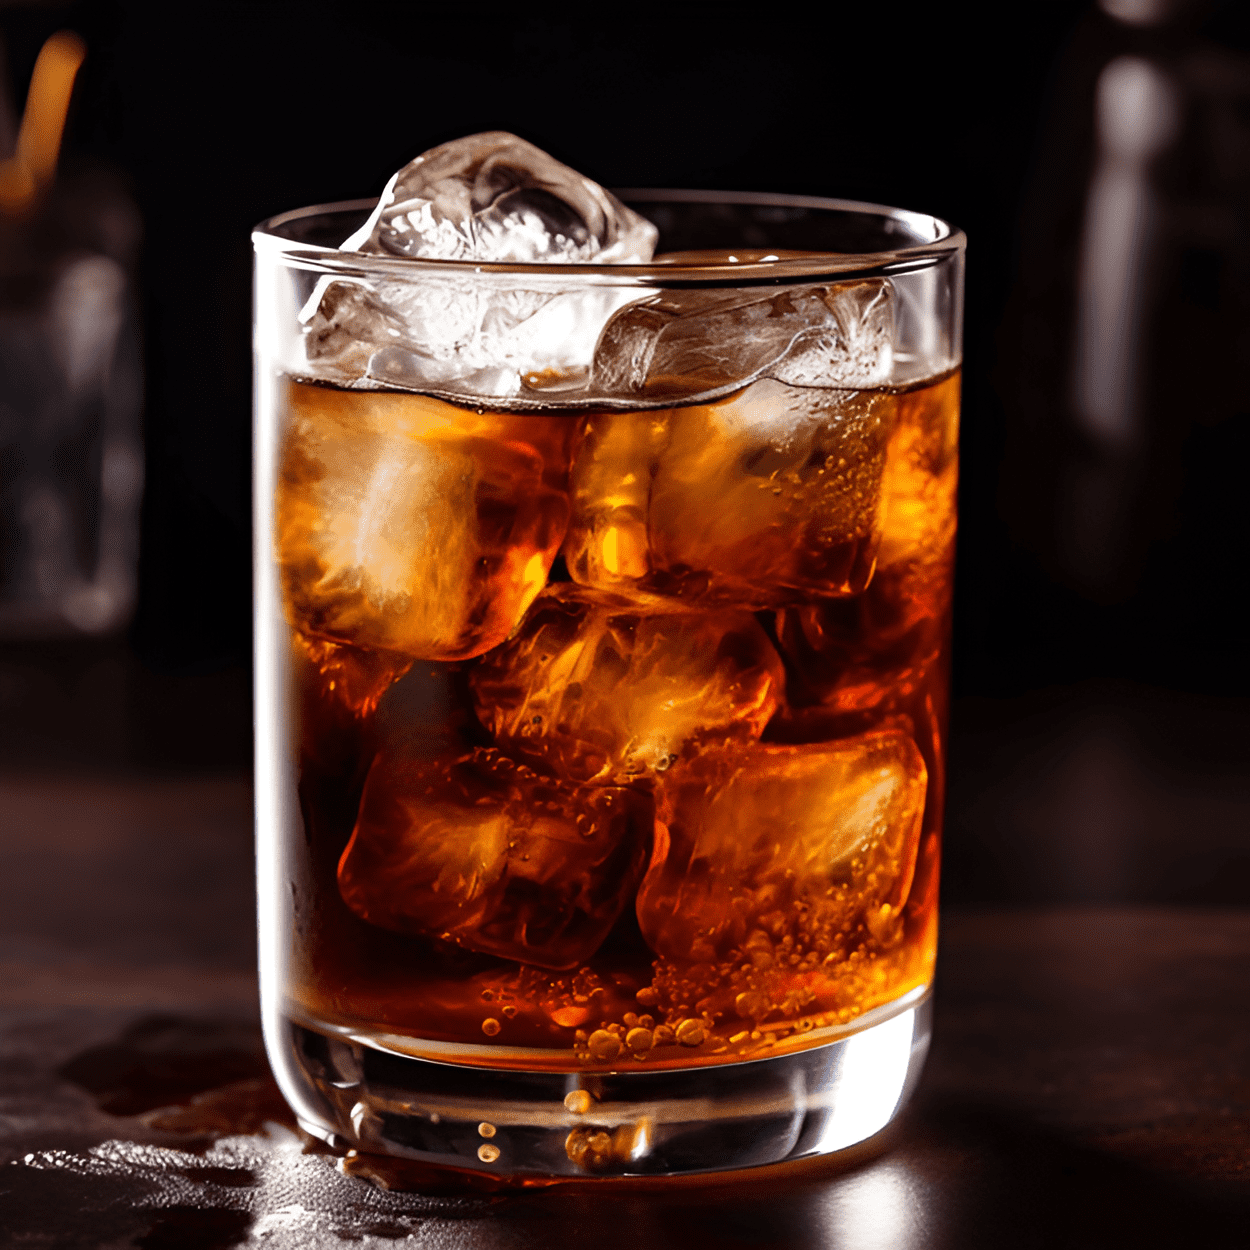 Mind Eraser Recipe - The Mind Eraser has a strong, potent taste. The coffee liqueur adds a sweet, deep, and rich flavor, while the vodka gives it a sharp, clear kick. The soda water lightens the drink and adds a refreshing fizz.